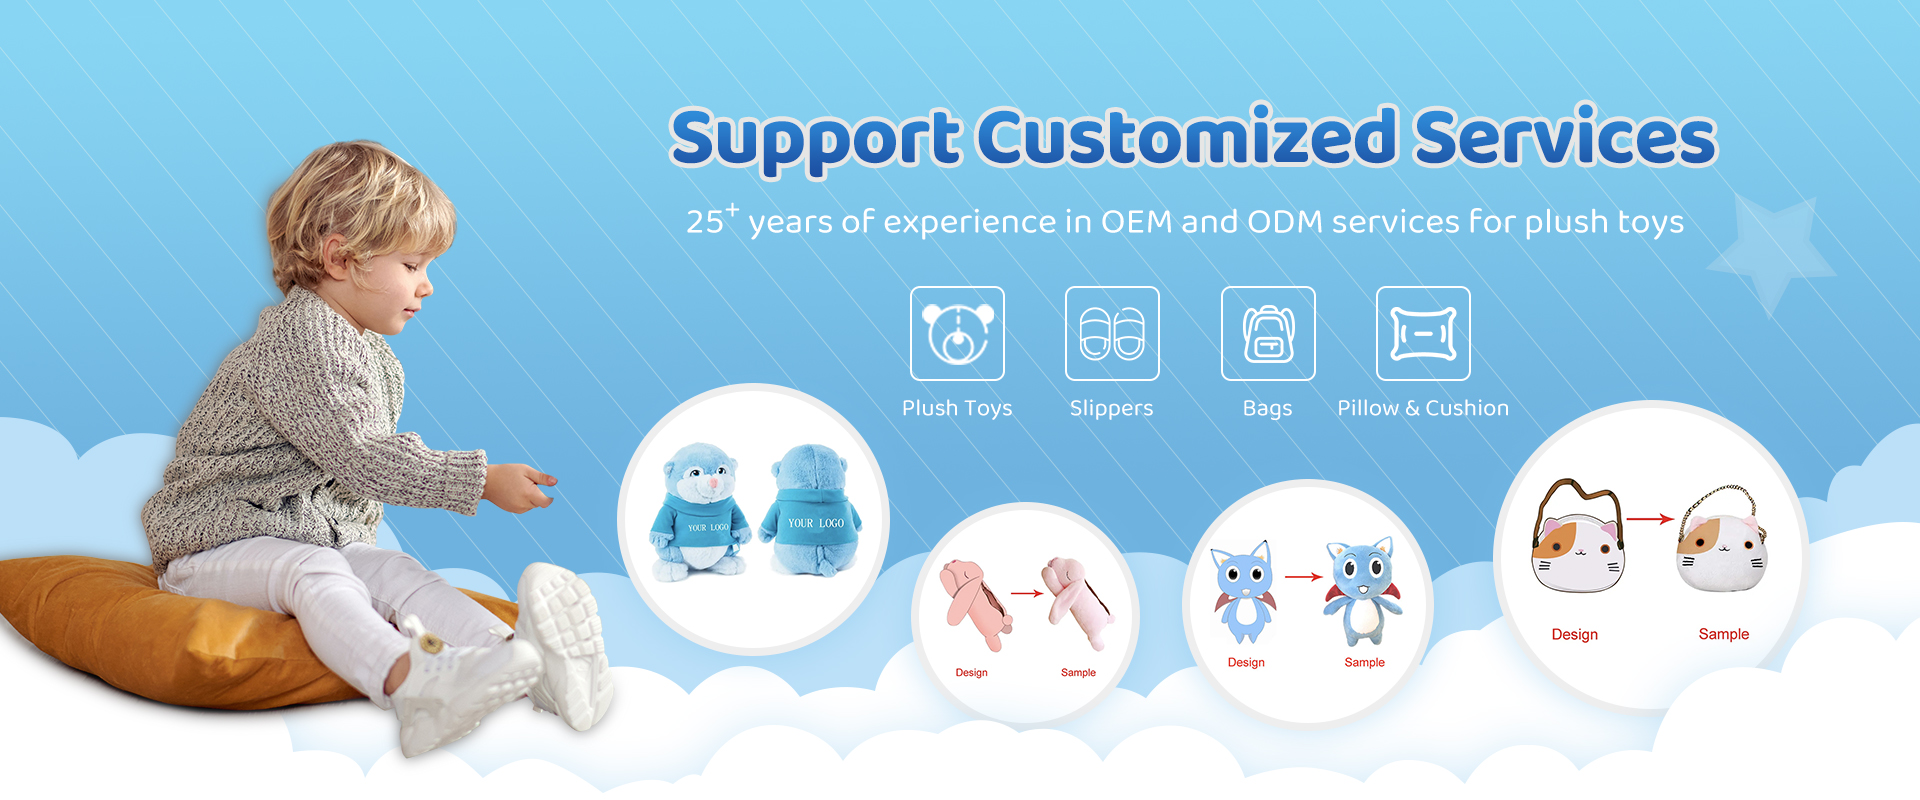 Support customized services